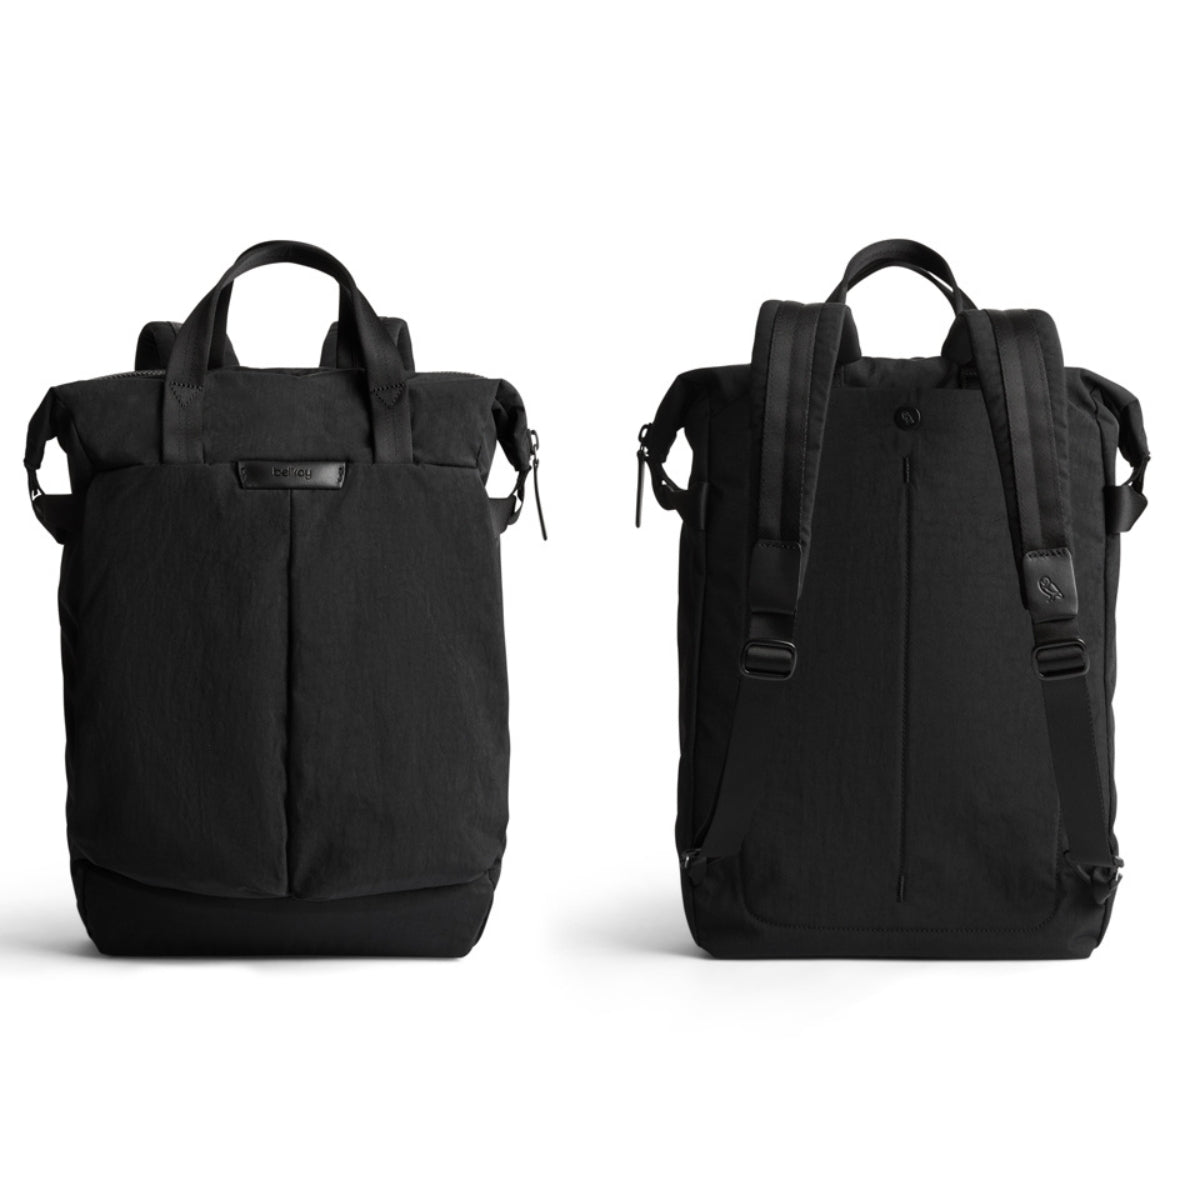 Bellroy Tokyo Totepack Compact in Raven